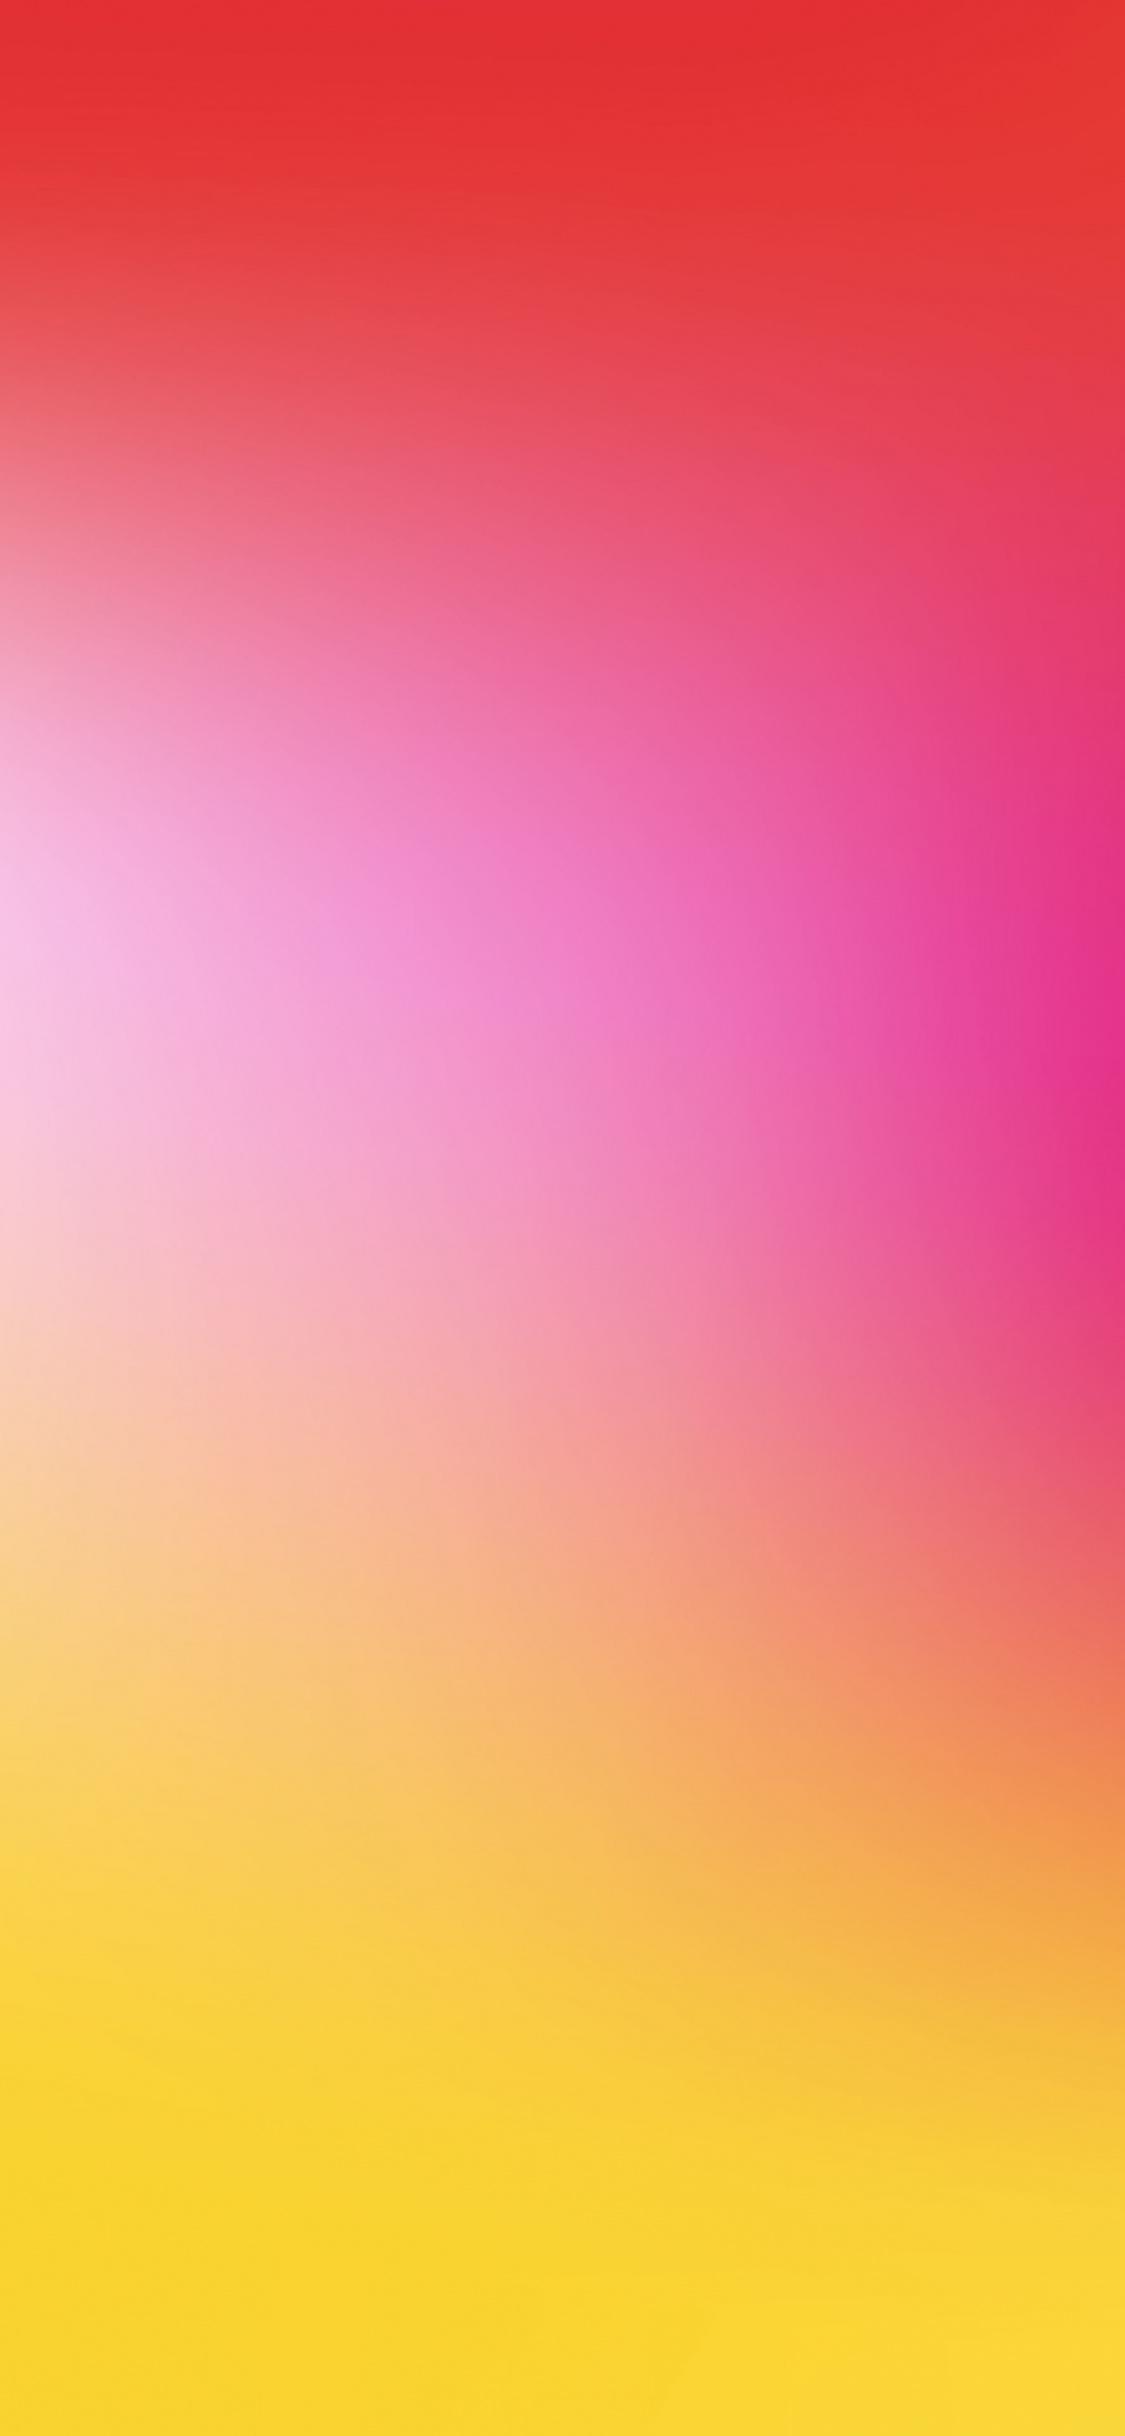 Download 1125x2436 wallpaper gradient, yellow and pink